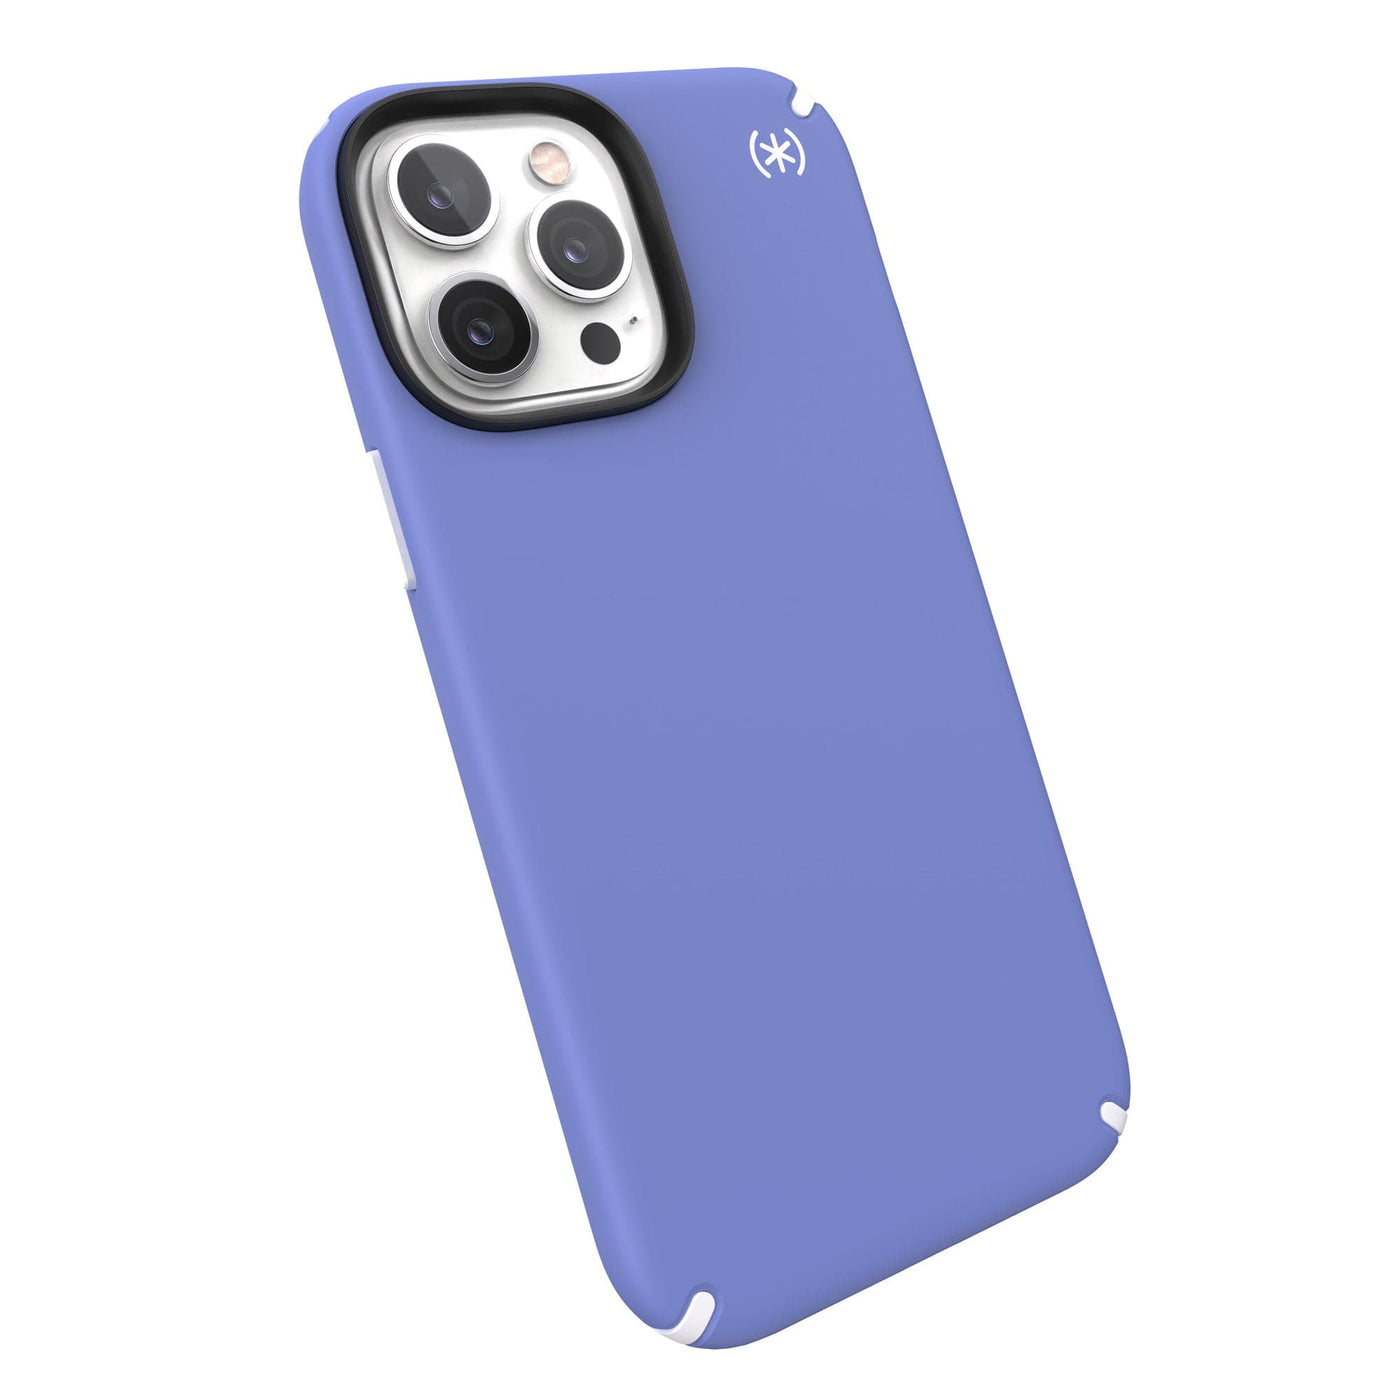 Speck Presidio2 Pro MagSafe iPhone 13 Pro Max Cases Best iPhone 13 Pro Max  - $54.99